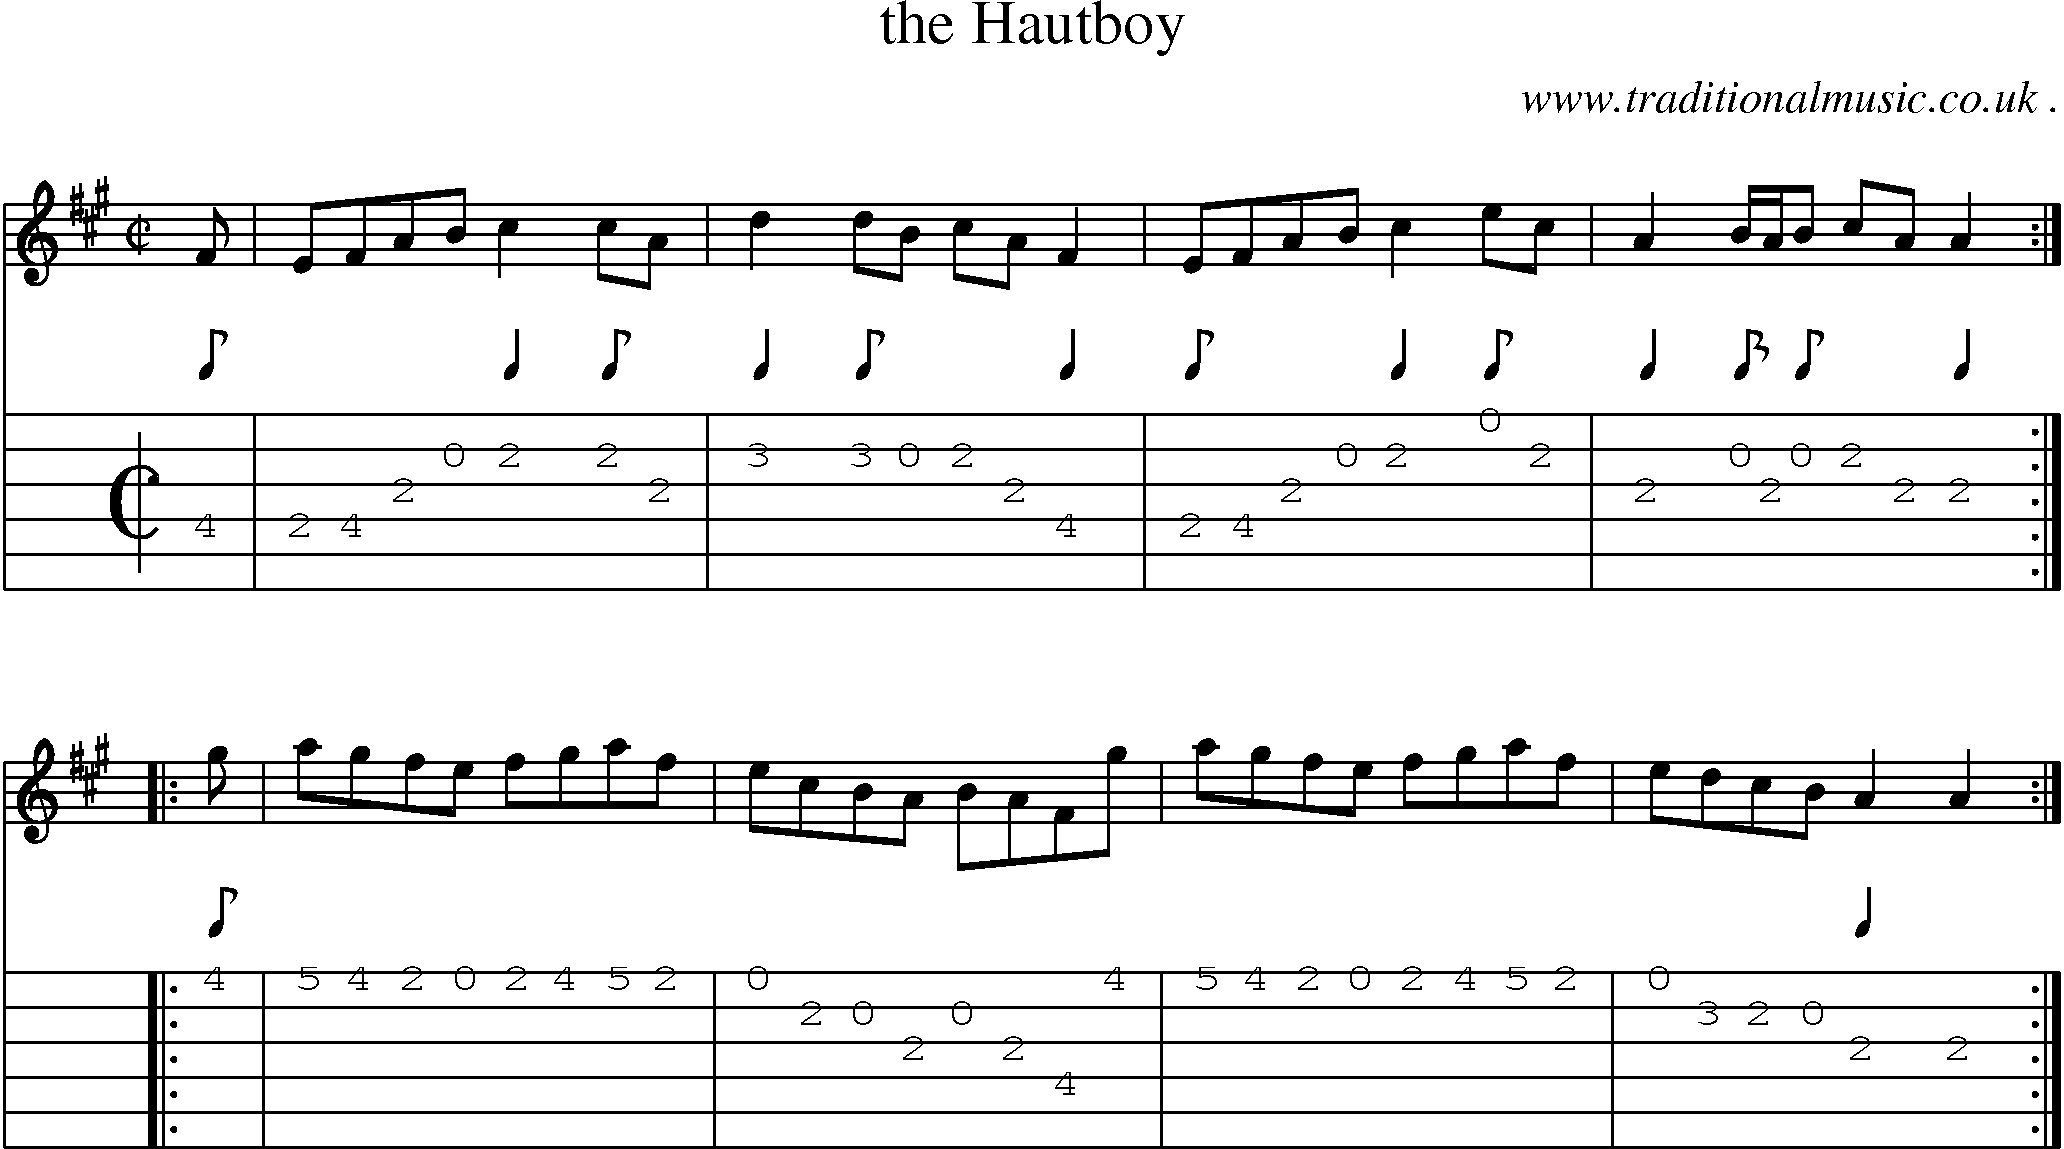 Sheet-Music and Guitar Tabs for The Hautboy